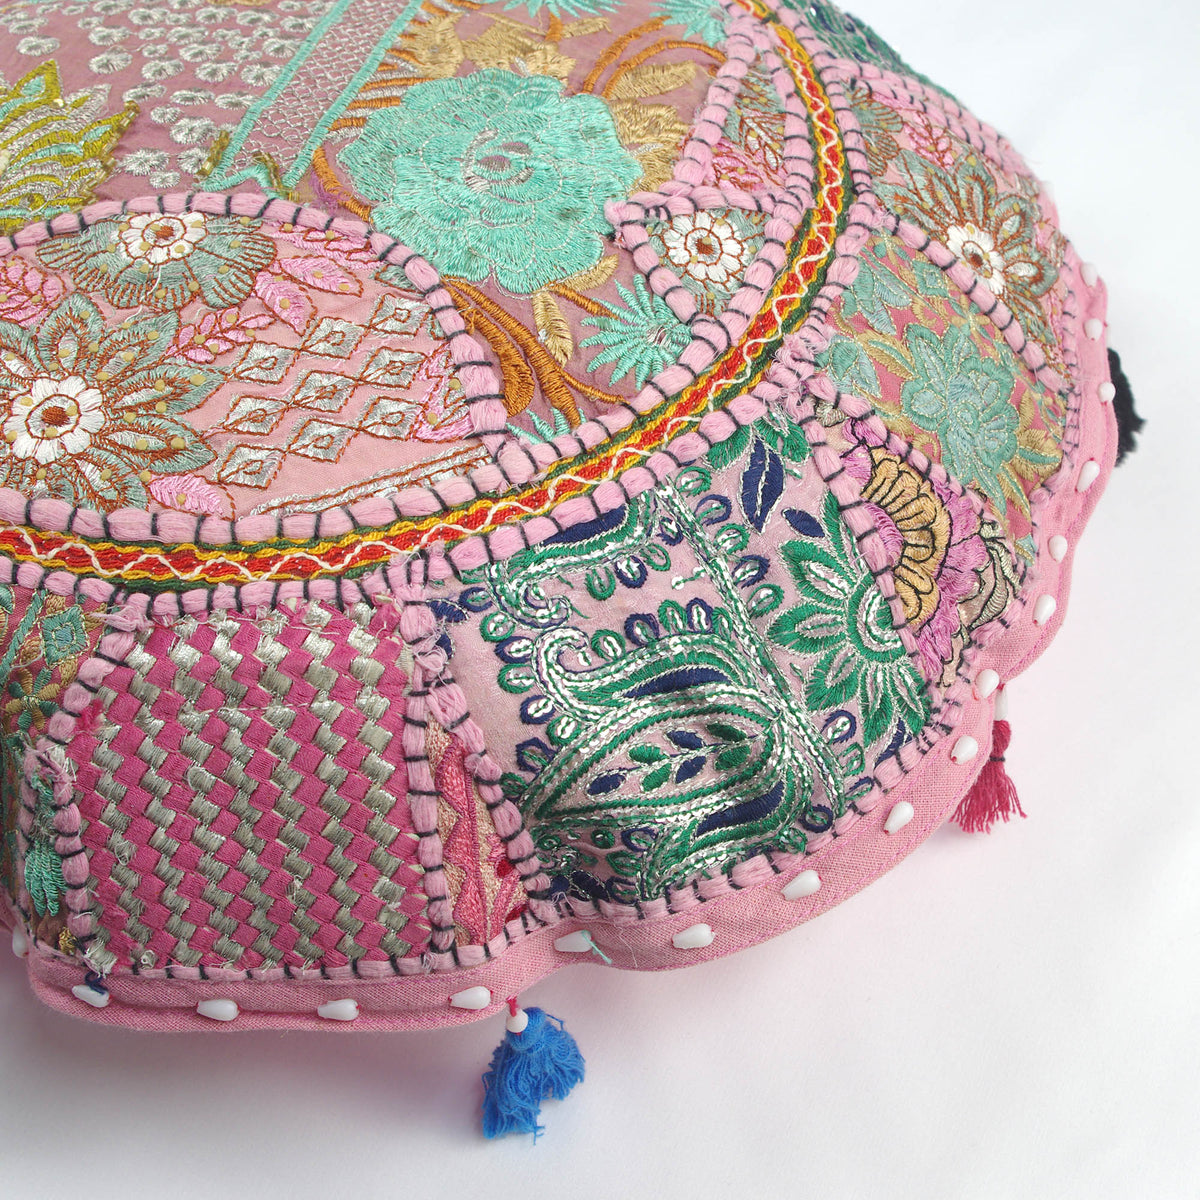 Round Pink Floor Embroidered Patchwork Pouf Ottoman Indian Vintage Cushion Cover 18"